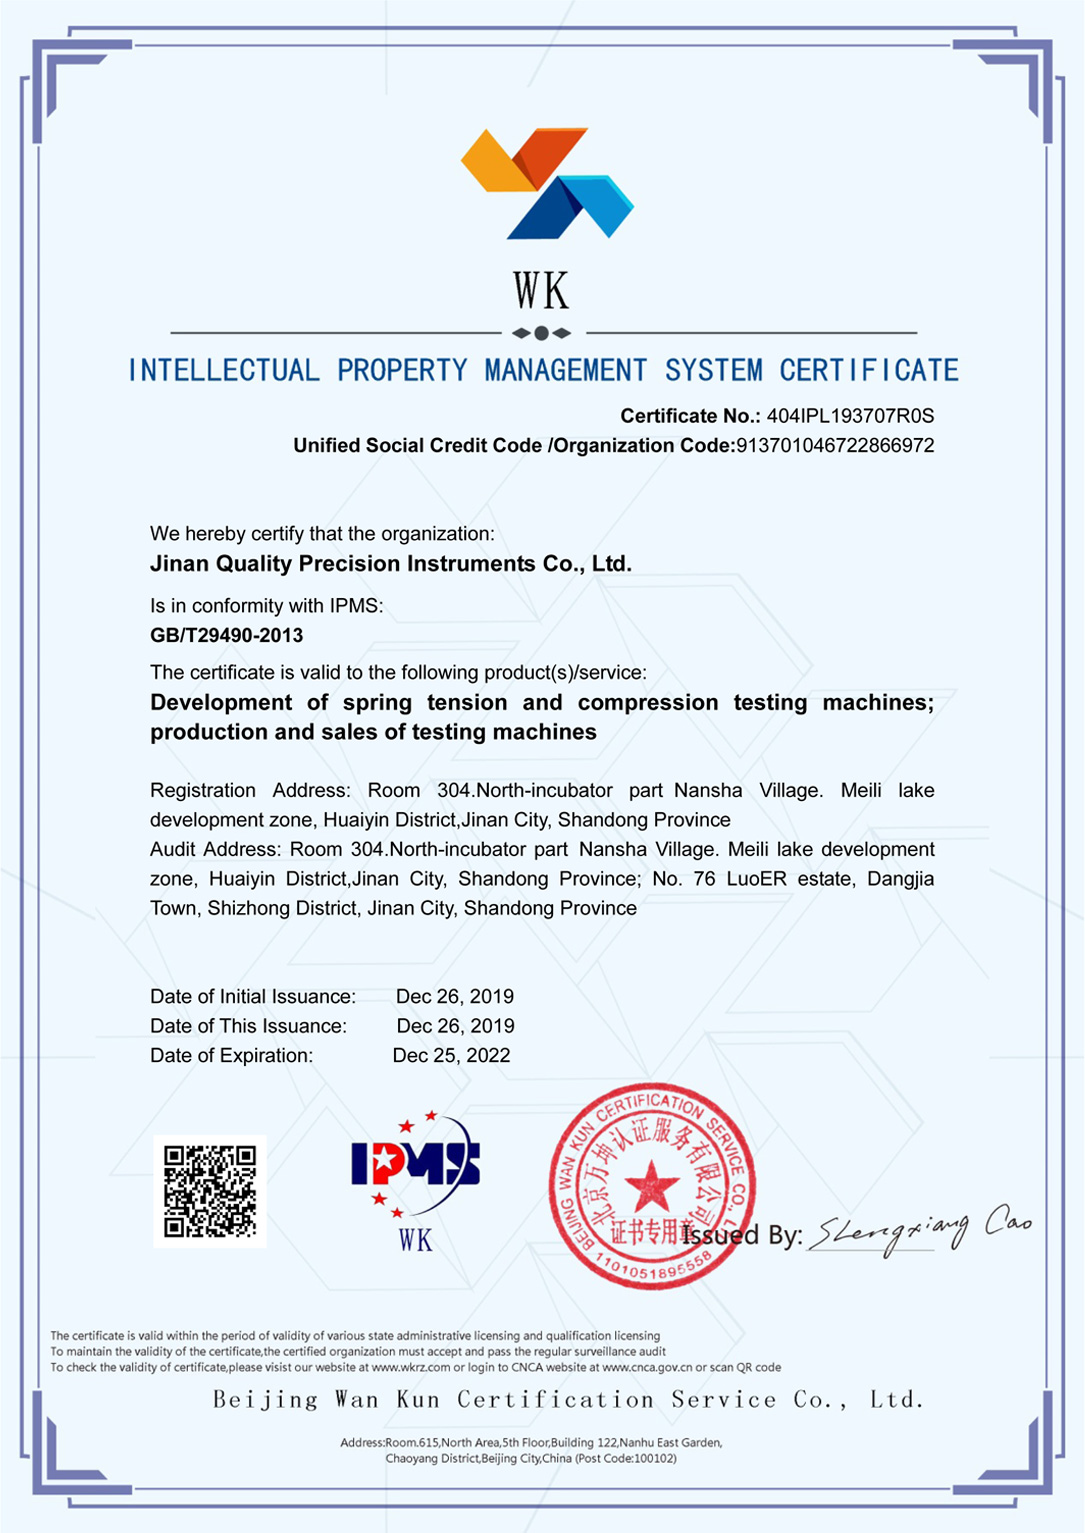 Intellectual property management system certificate